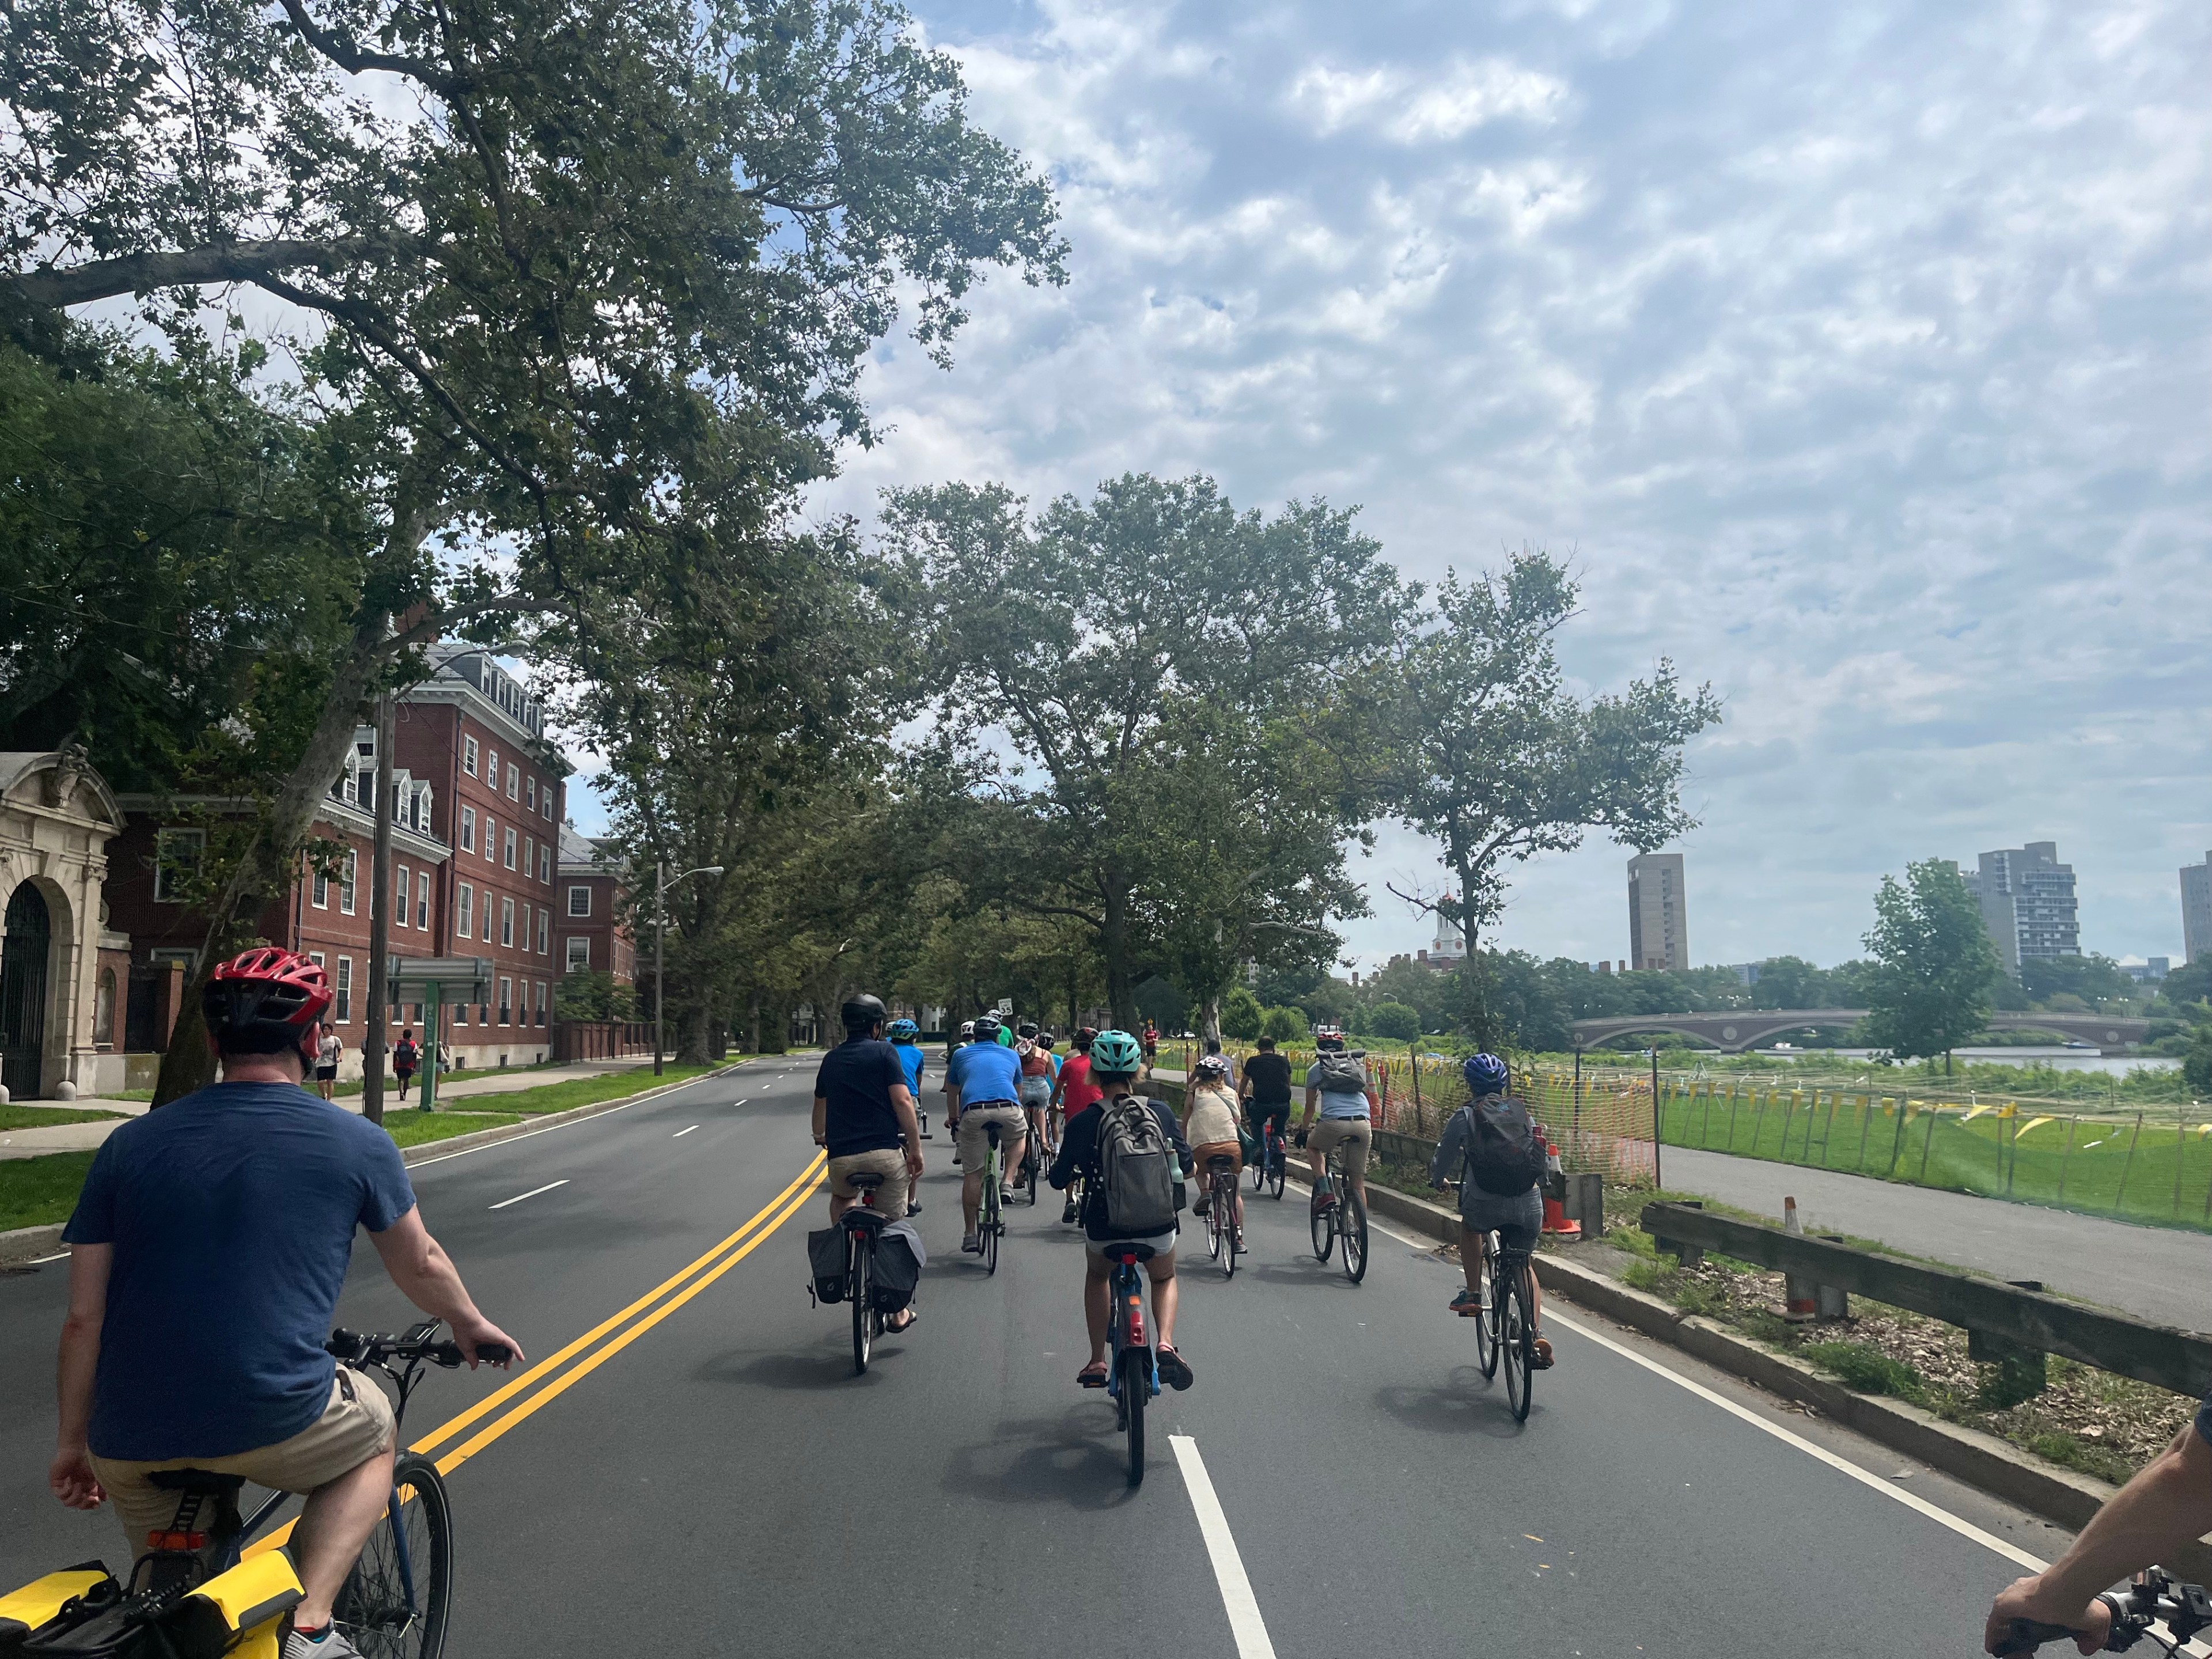 A crowd of people on bikes rides down an empty four-lane highway. On the left side of the roadway are large trees and multi-story brick buildings; on the right is the Charles River with the Boston skyline in the distance.